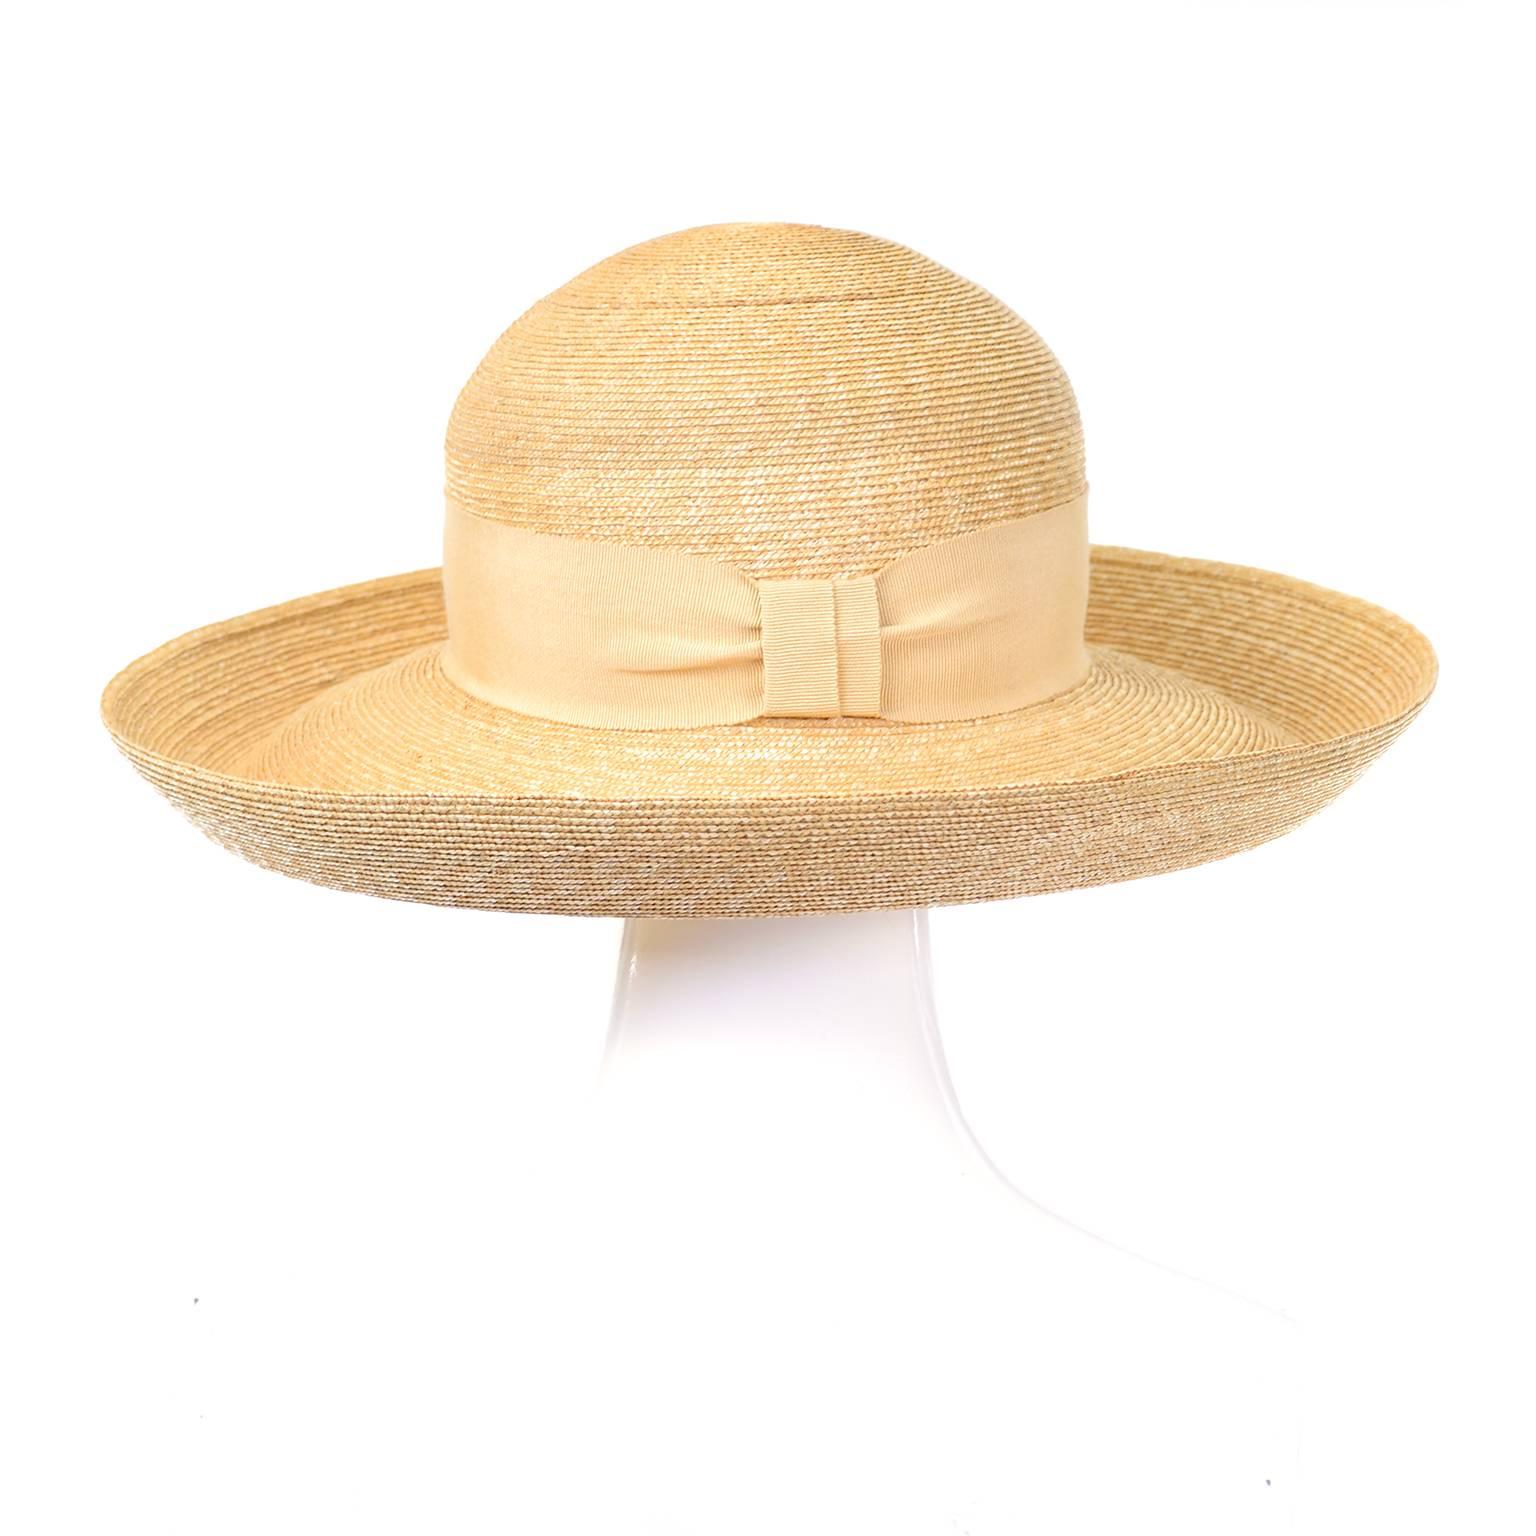 This pretty vintage straw hat is from the fabulous Milliner Patricia Underwood. The hat has a thick cream ribbon around the head and a bow in the back. The brim turns up at the ends and measures 4.5